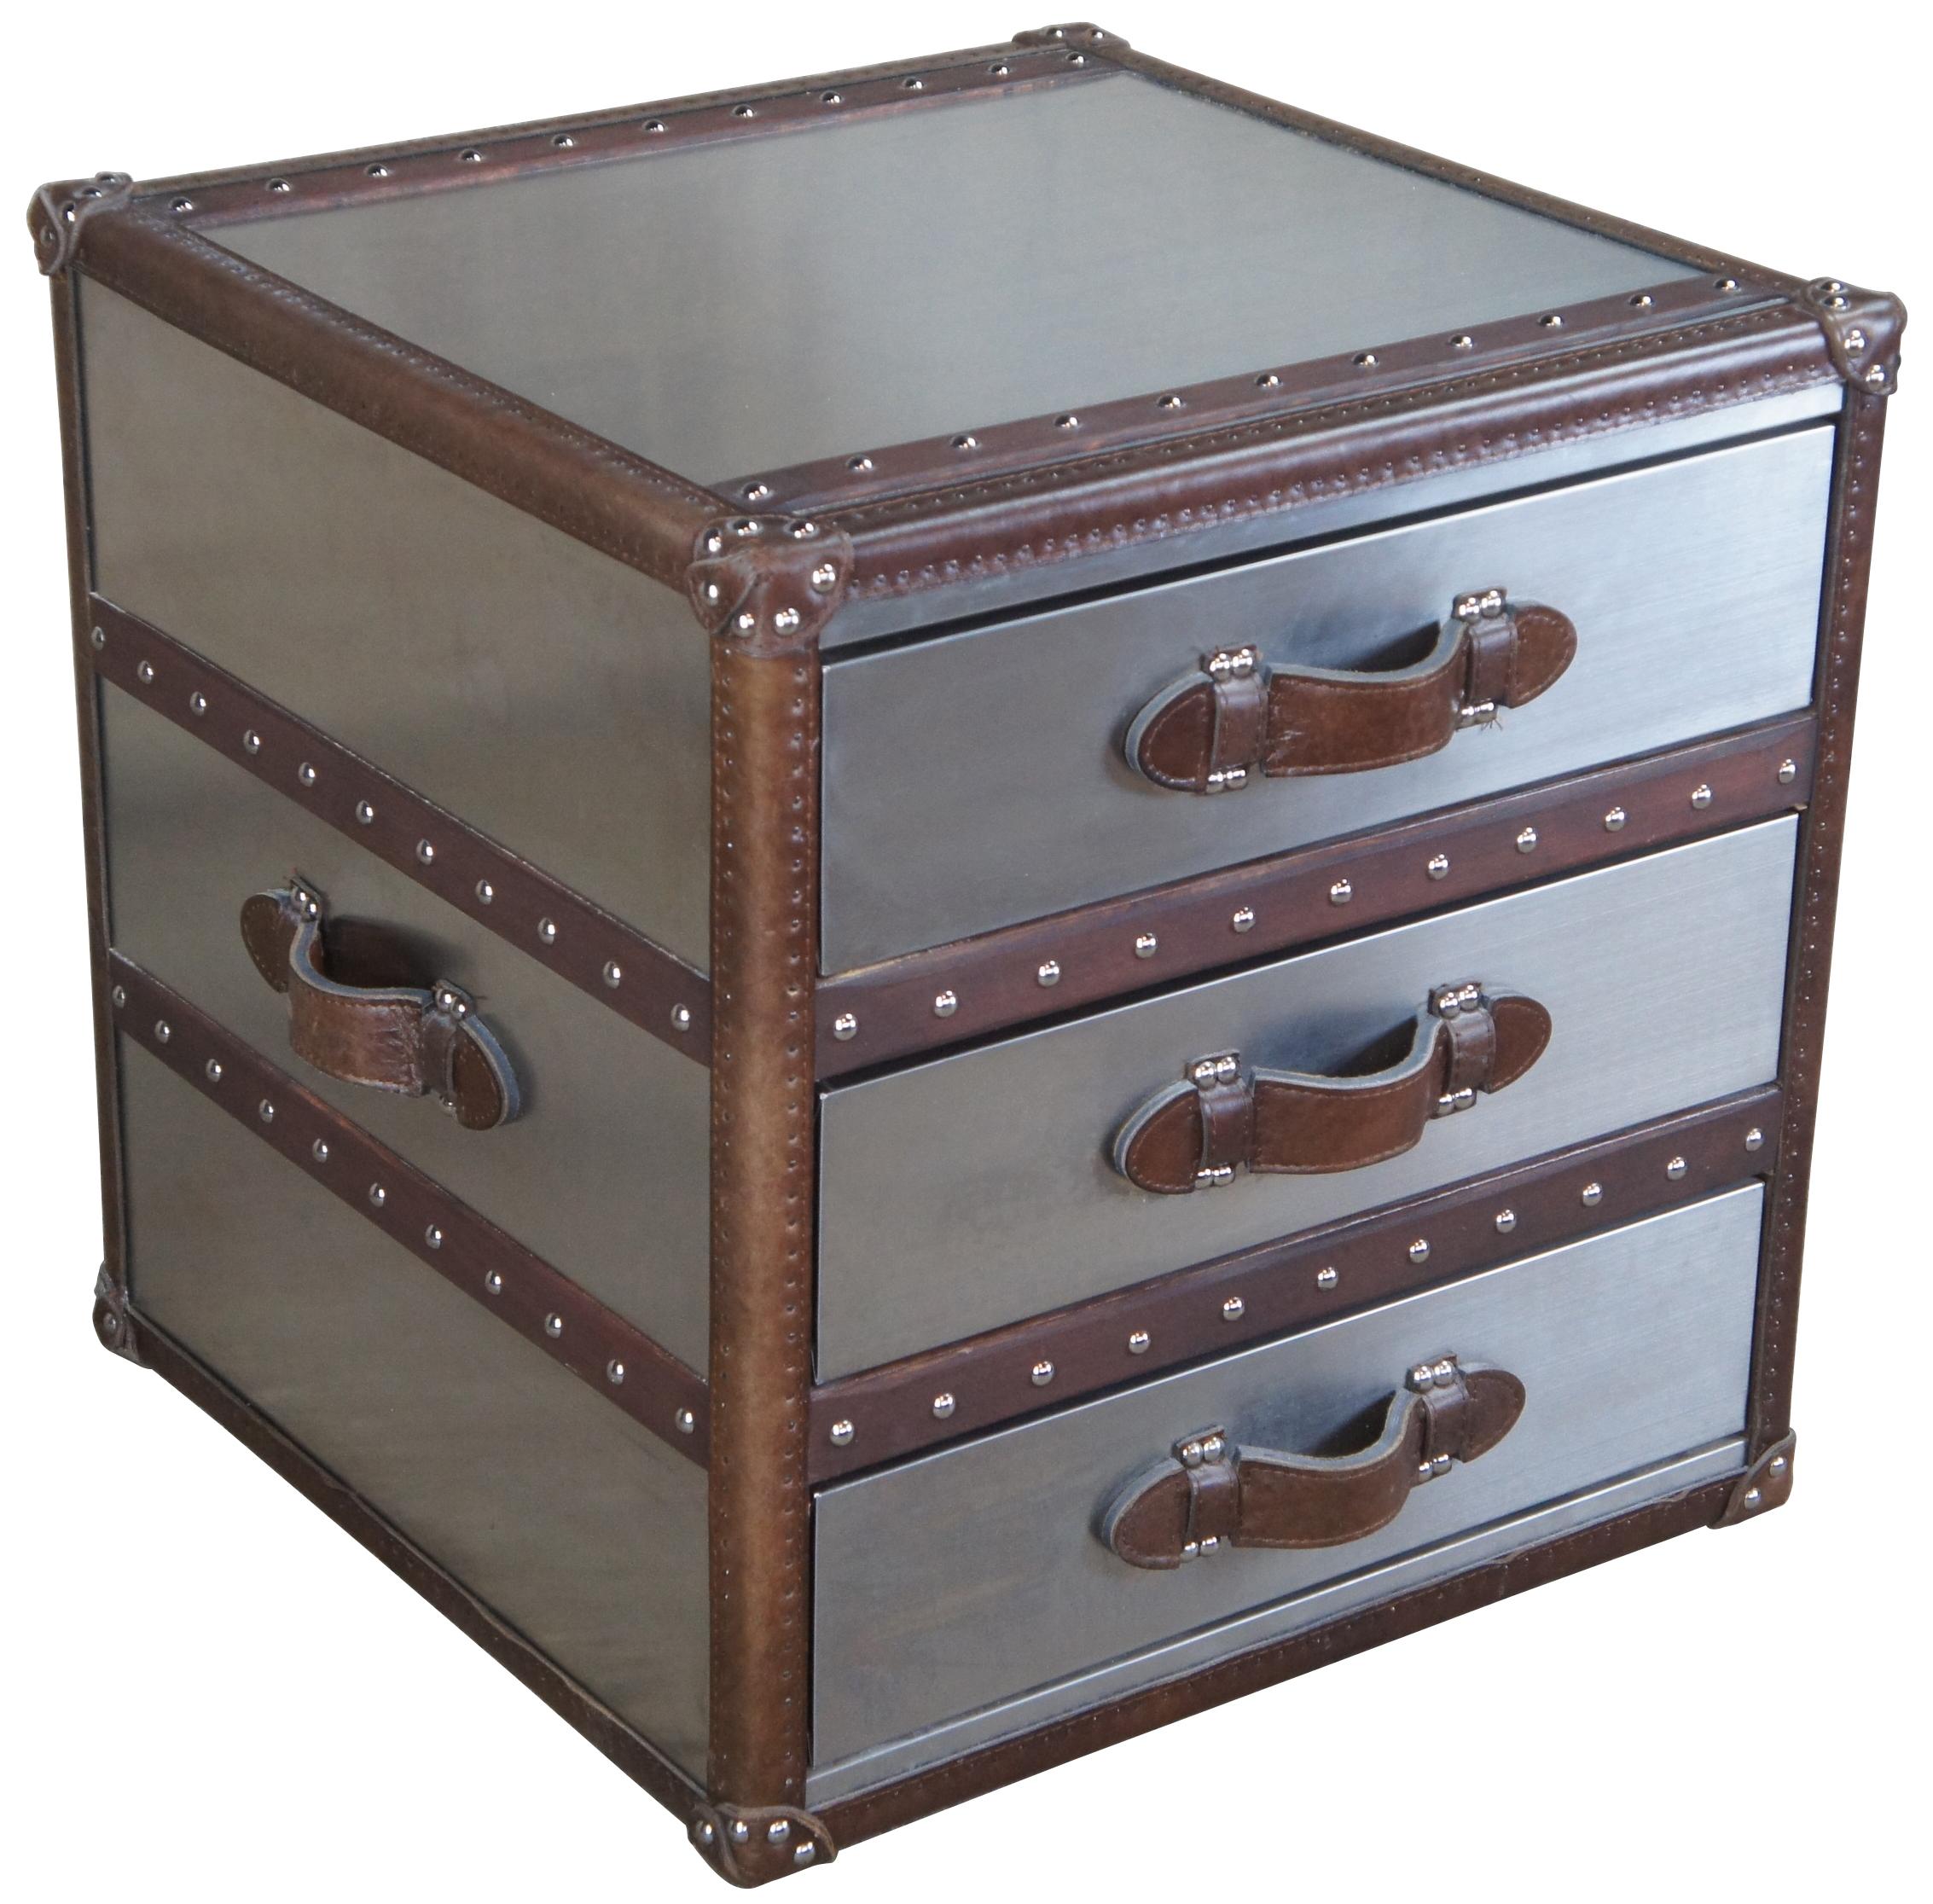 Handmade of brushed steel over a solid wood frame
Accented with up to 3,000 hand-hammered brass nailheads
Features canvas-lined drawers
Leather-bound corner brackets, leather-wrapped handles, oak slats with a tobacco finish and cast-metal